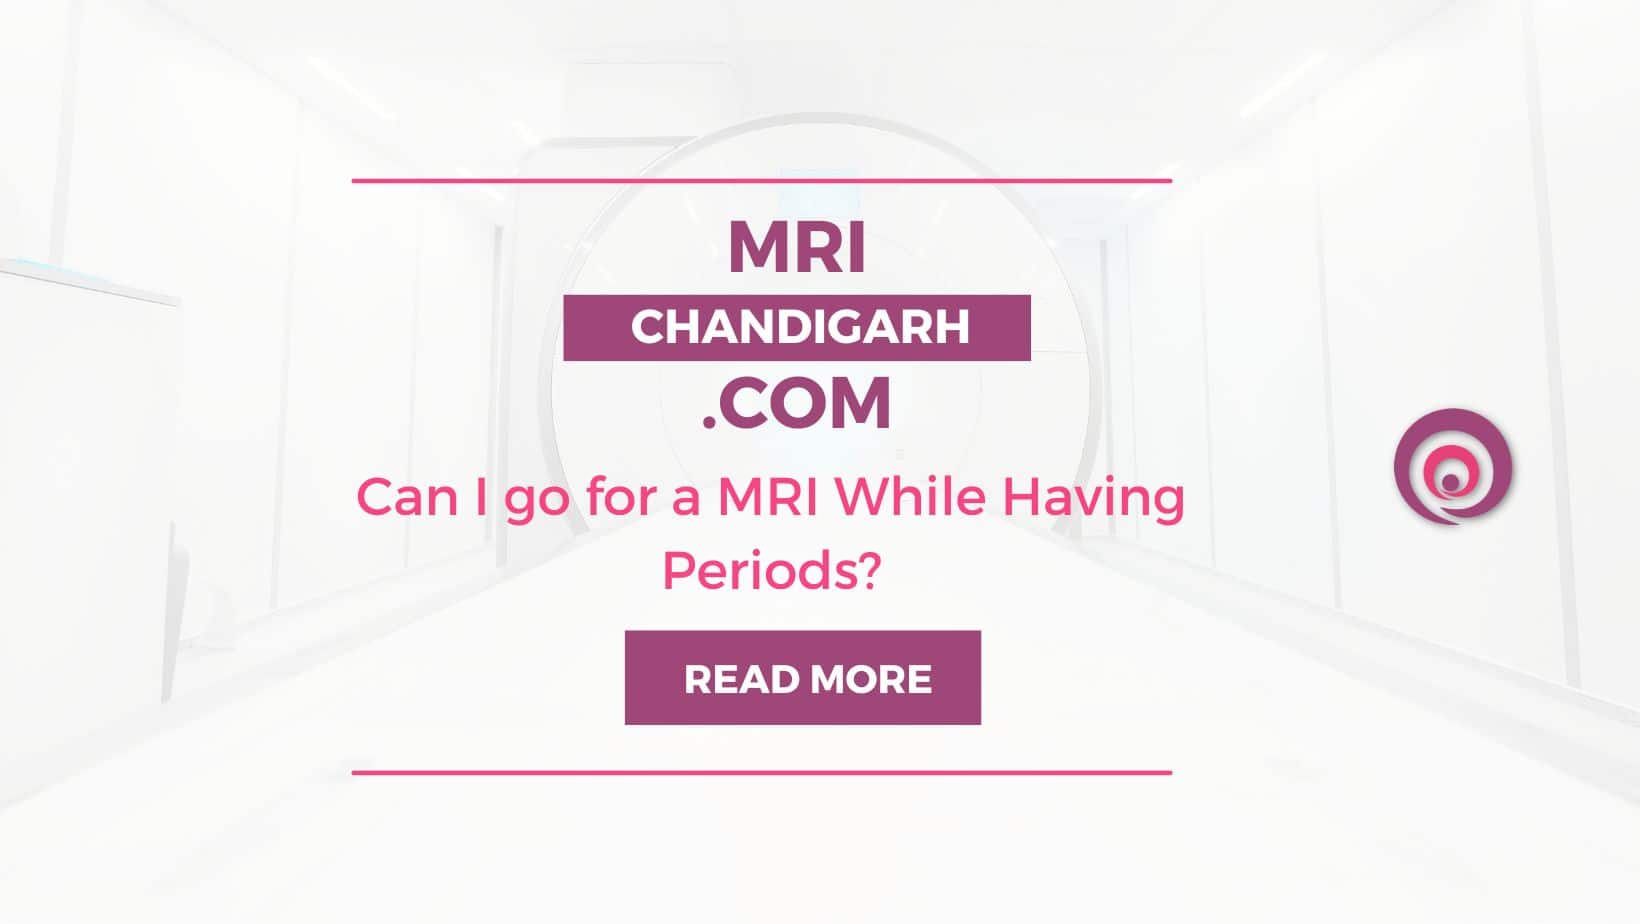 Can I go for a MRI While Having Periods?